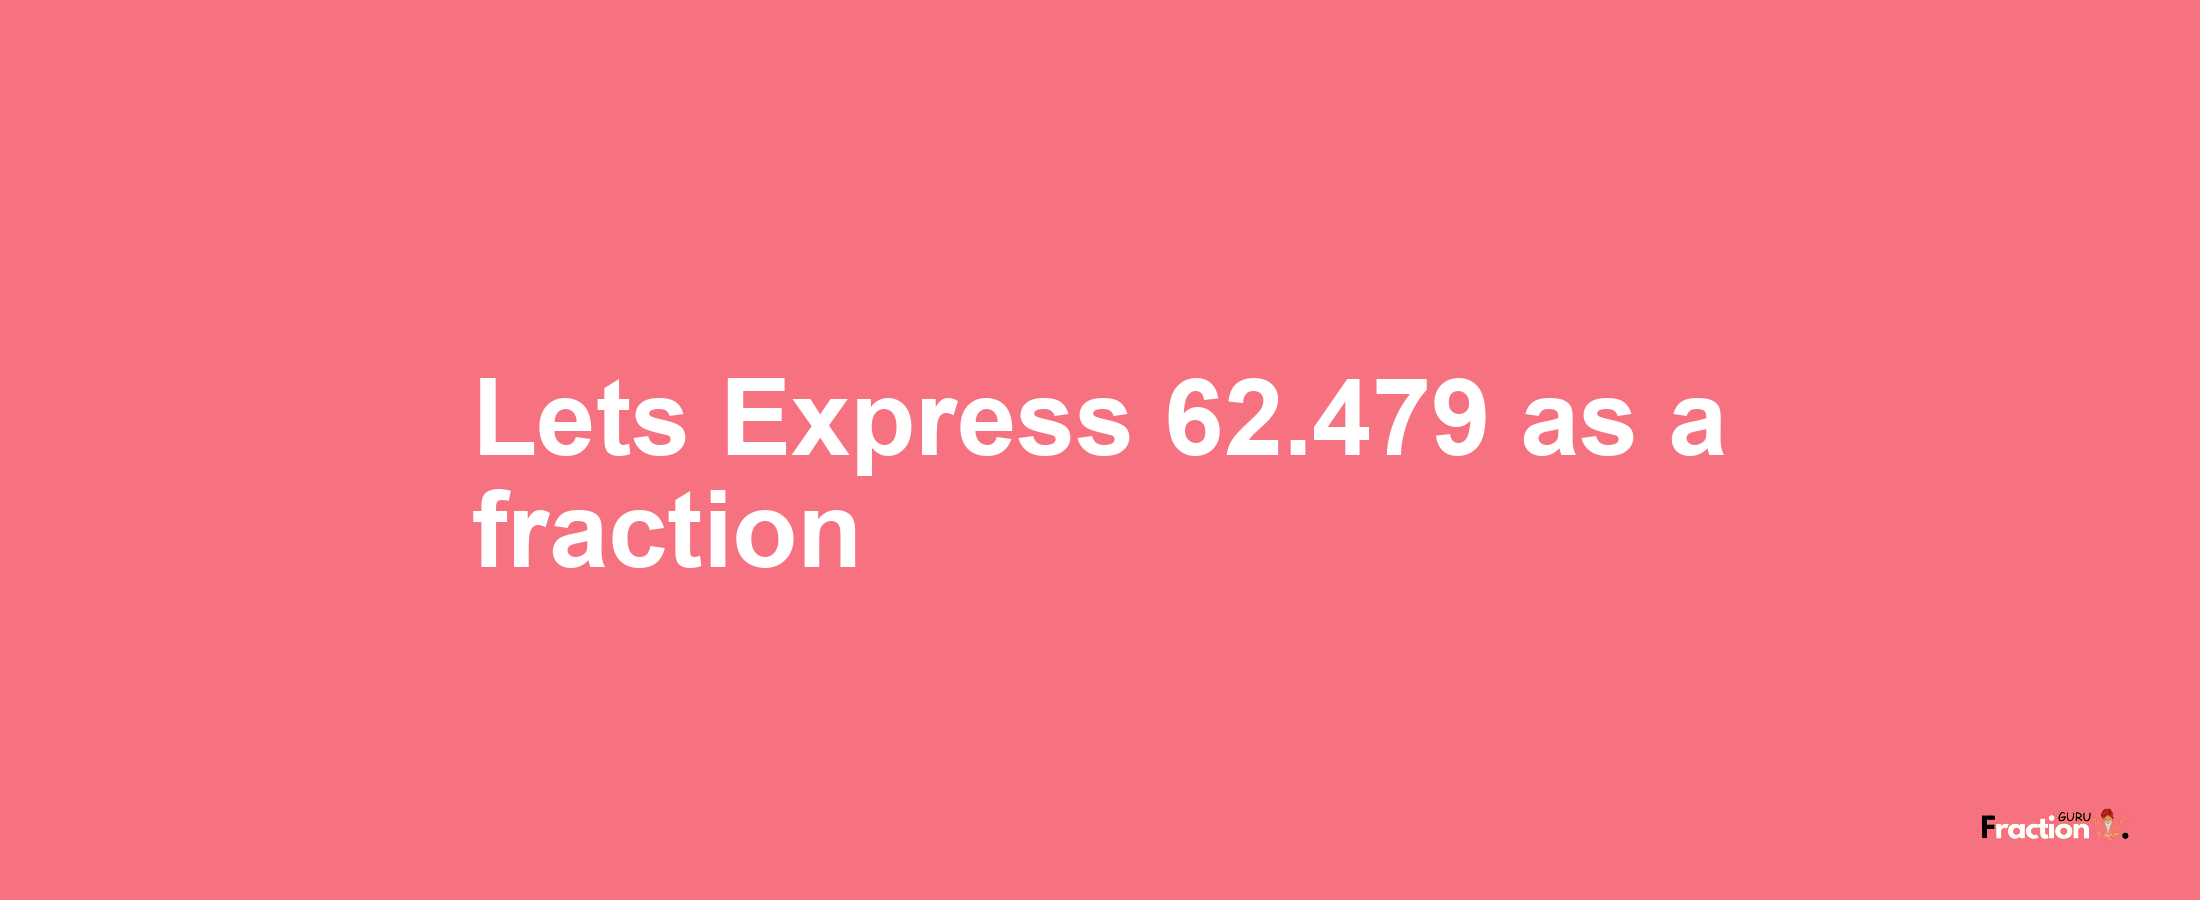 Lets Express 62.479 as afraction